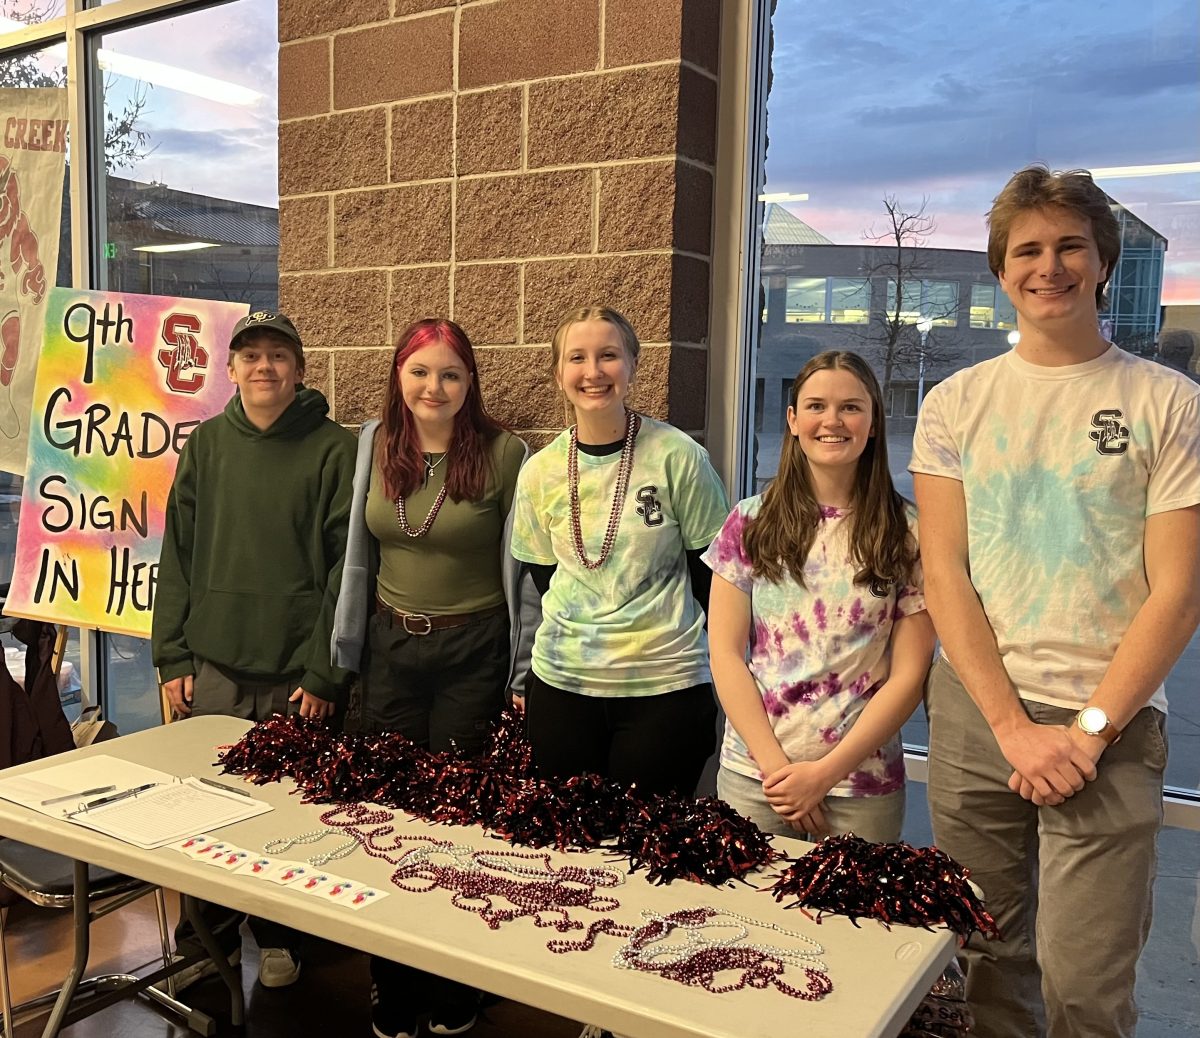 RLC member hosting the 9th grade Spirit Game. Members present (left to right) are Alex Dobson, Mia Frazier, Claire Atteberry, Lucy Scharf, and Benjamin Dolan.